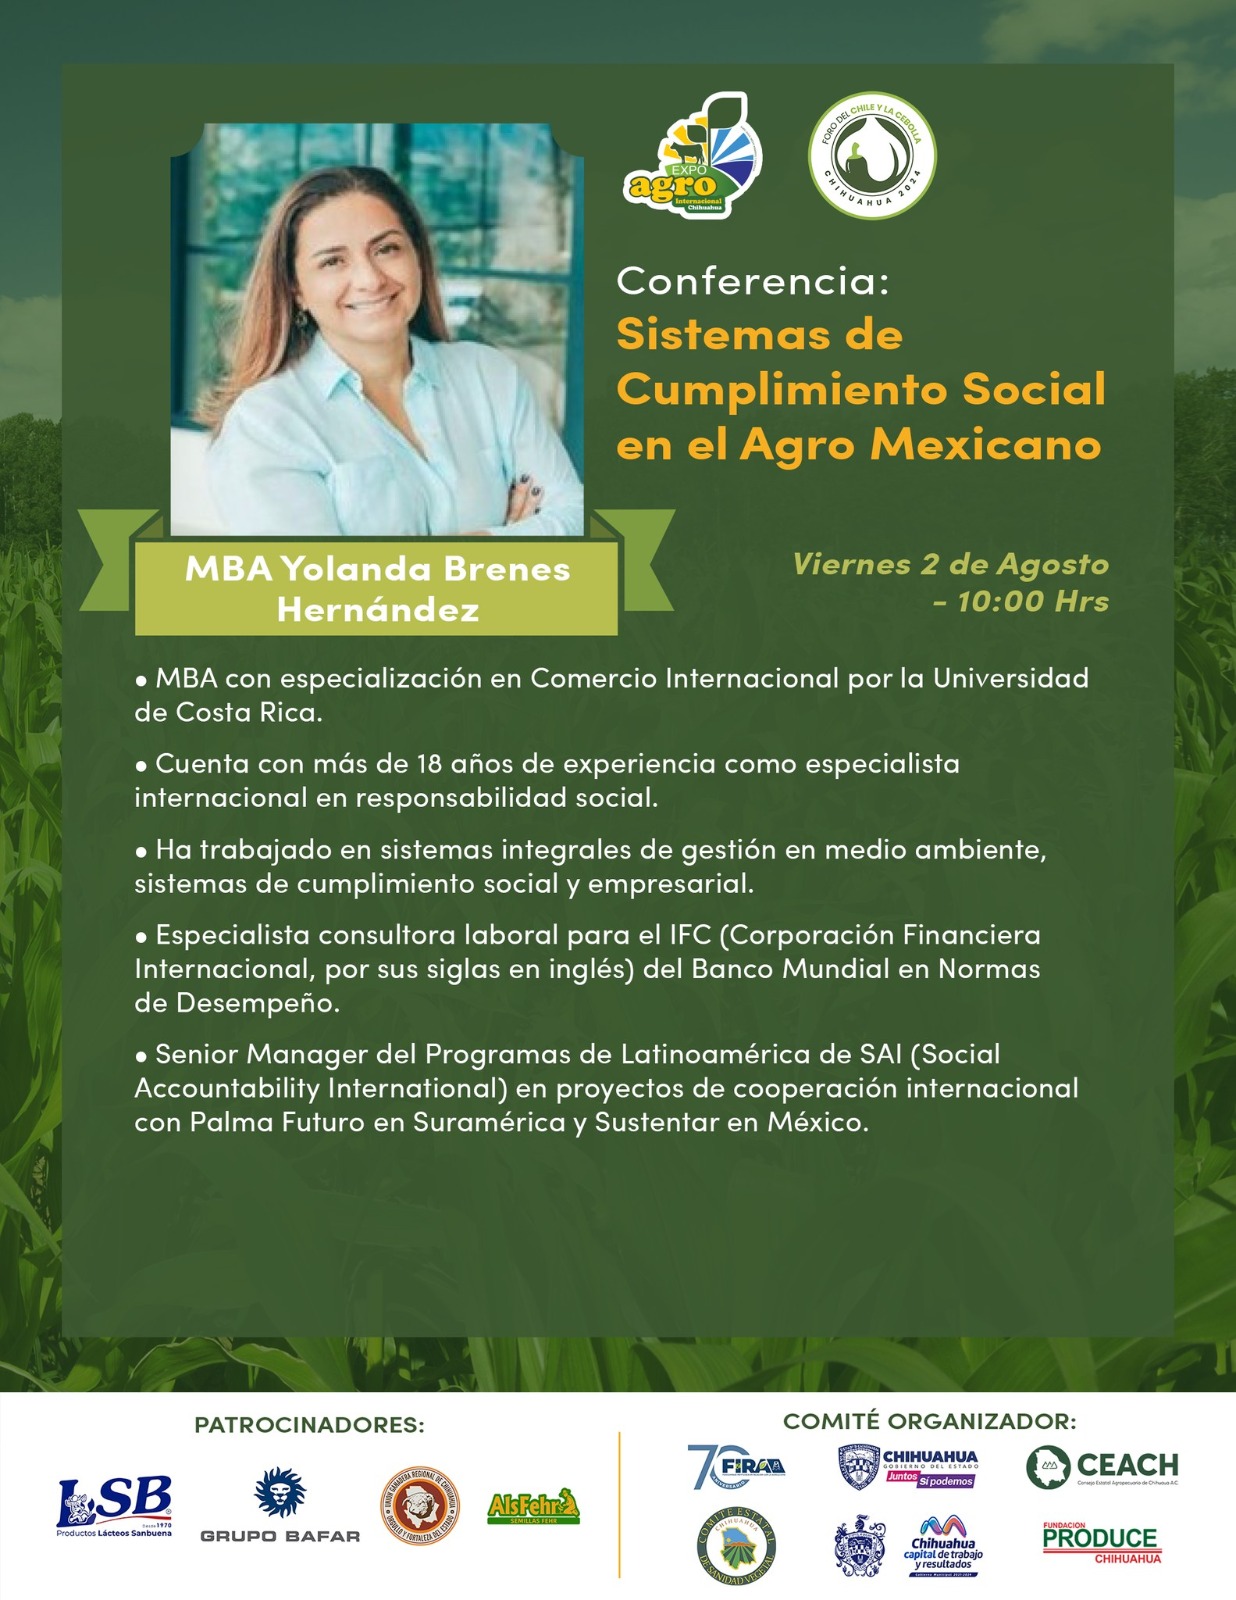 Flyer for Yolanda Brenez Hernandez' talk at the Agroexpo in Chihuahua